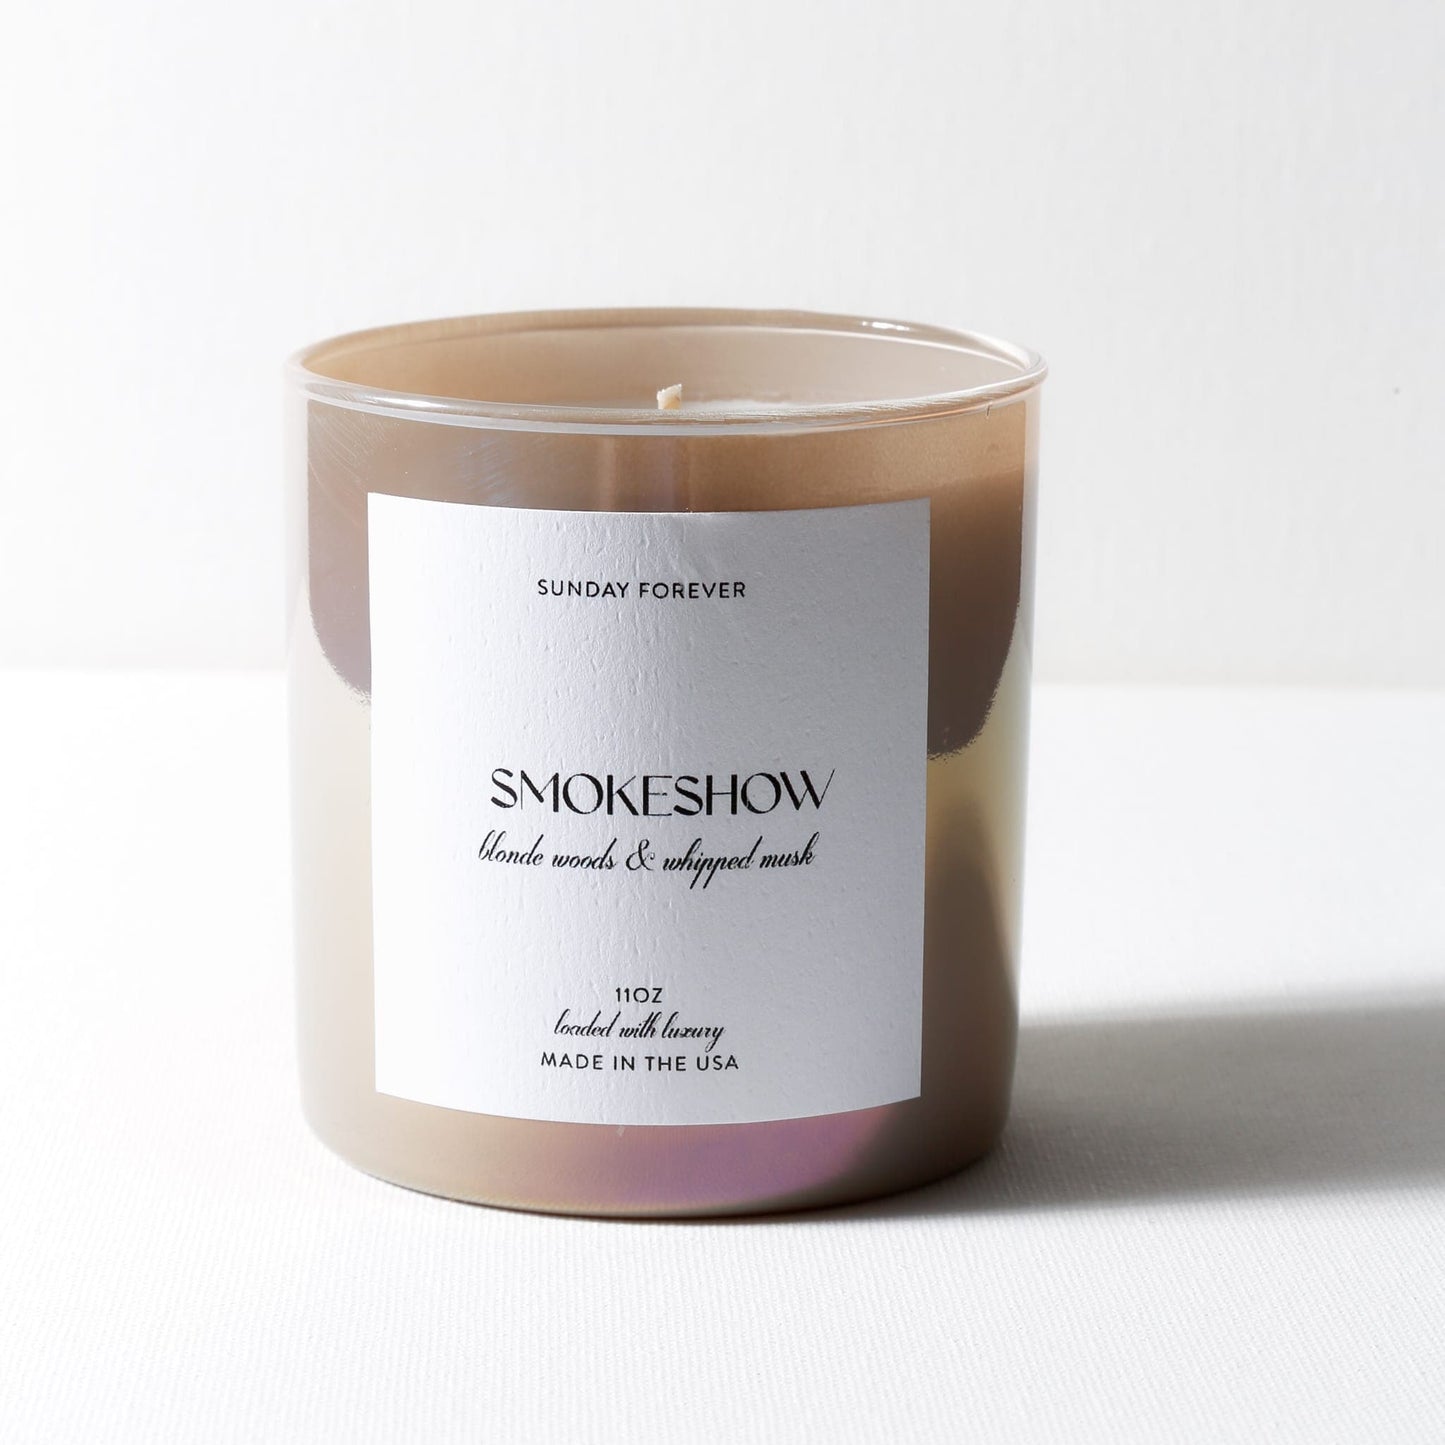 Sunday Forever Candle Smokeshow Luxury Candle with Blonde Woods and Whipped Musk